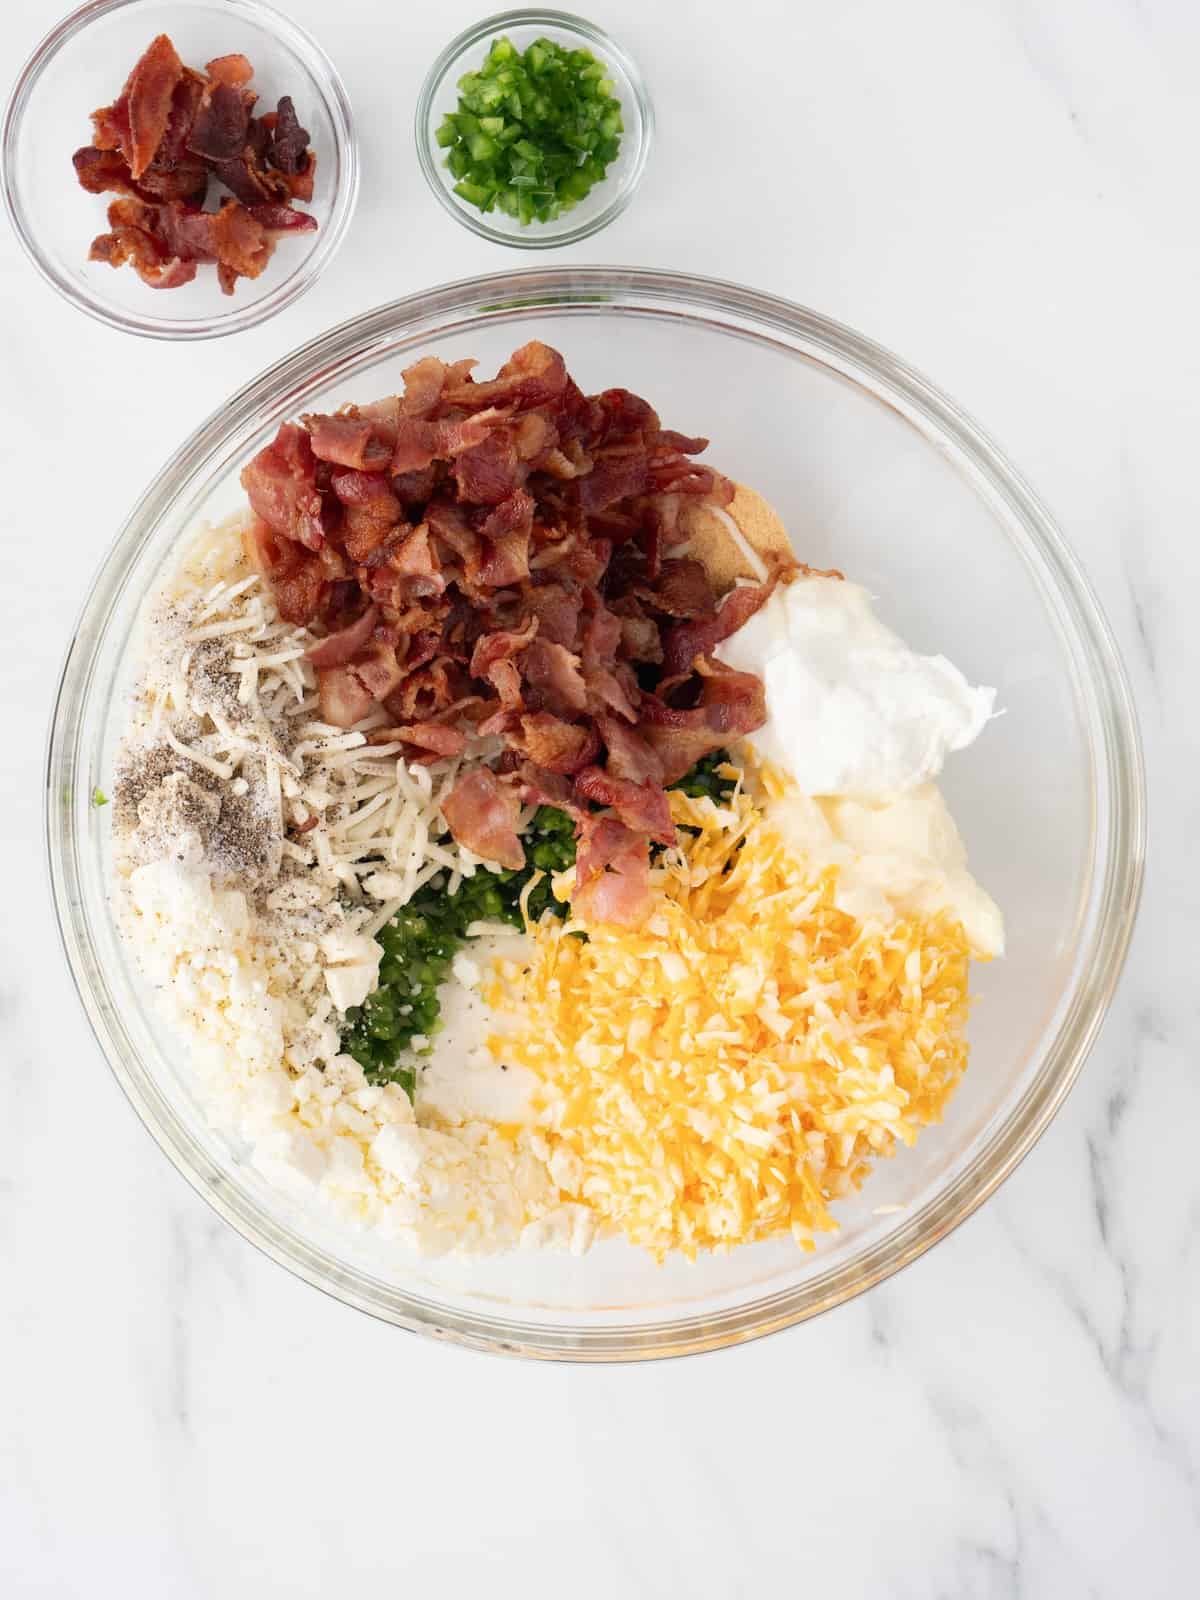 A large glass mixing bowl with all the ingredients to make jalapeño popper dip, with two small glass mixing bowls with bacon bits and chopped scallions.